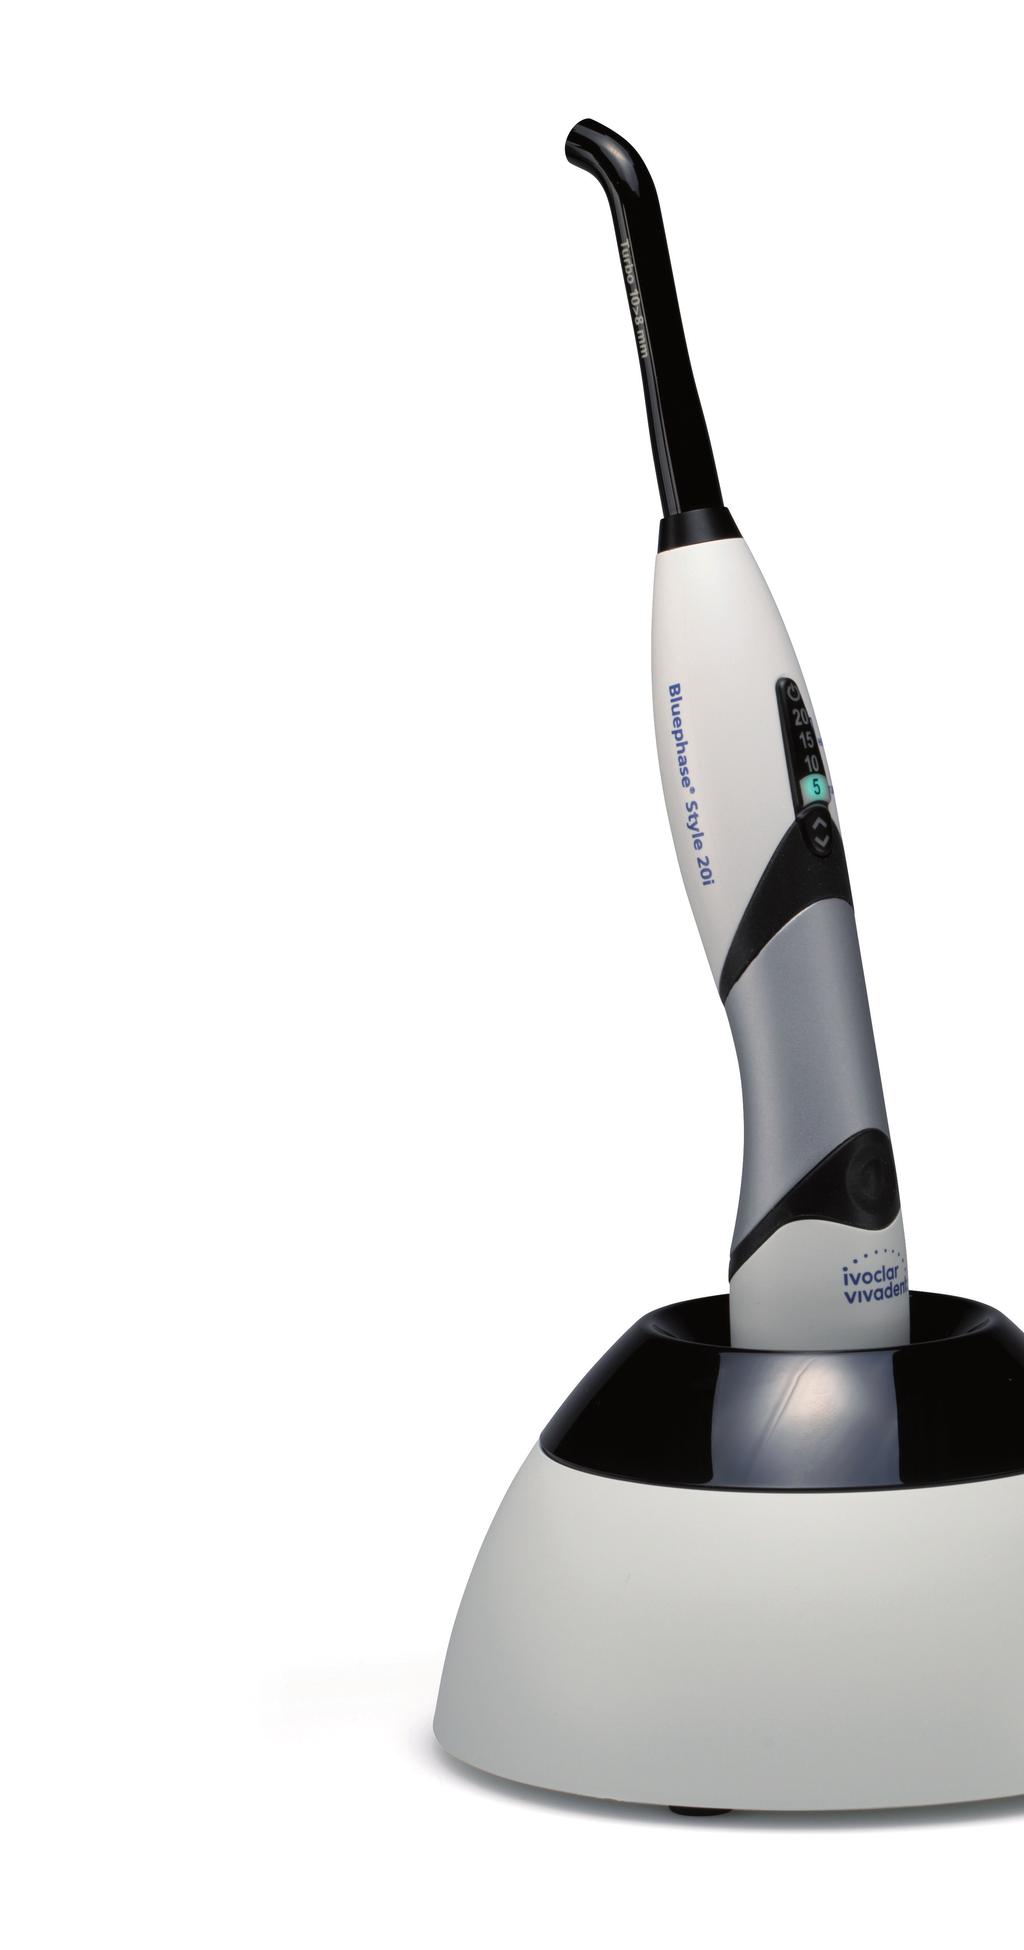 Bluephase Style 20i Bluephase Style 20i is a high-performance curing light that combines maximum light output with extremely short curing times.